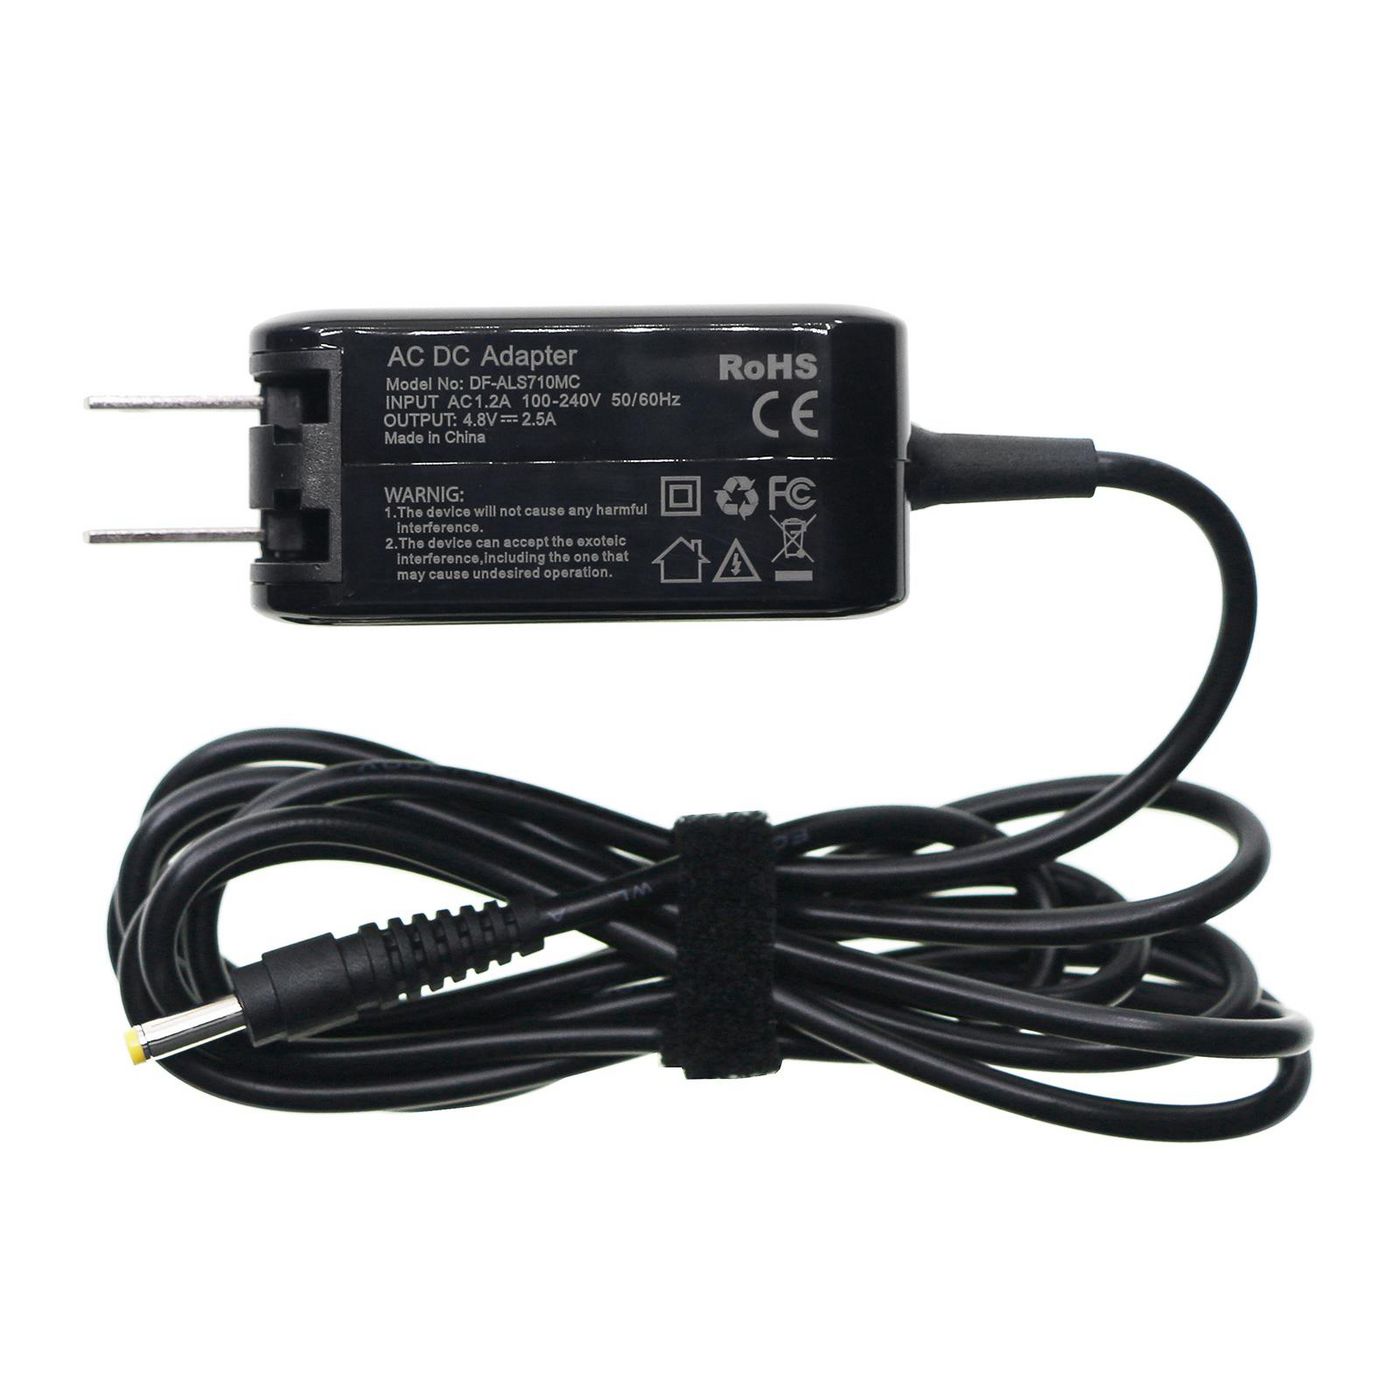 CoreParts MBXCAM-AC0035 W128409520 Charger for Olympus Camera, 